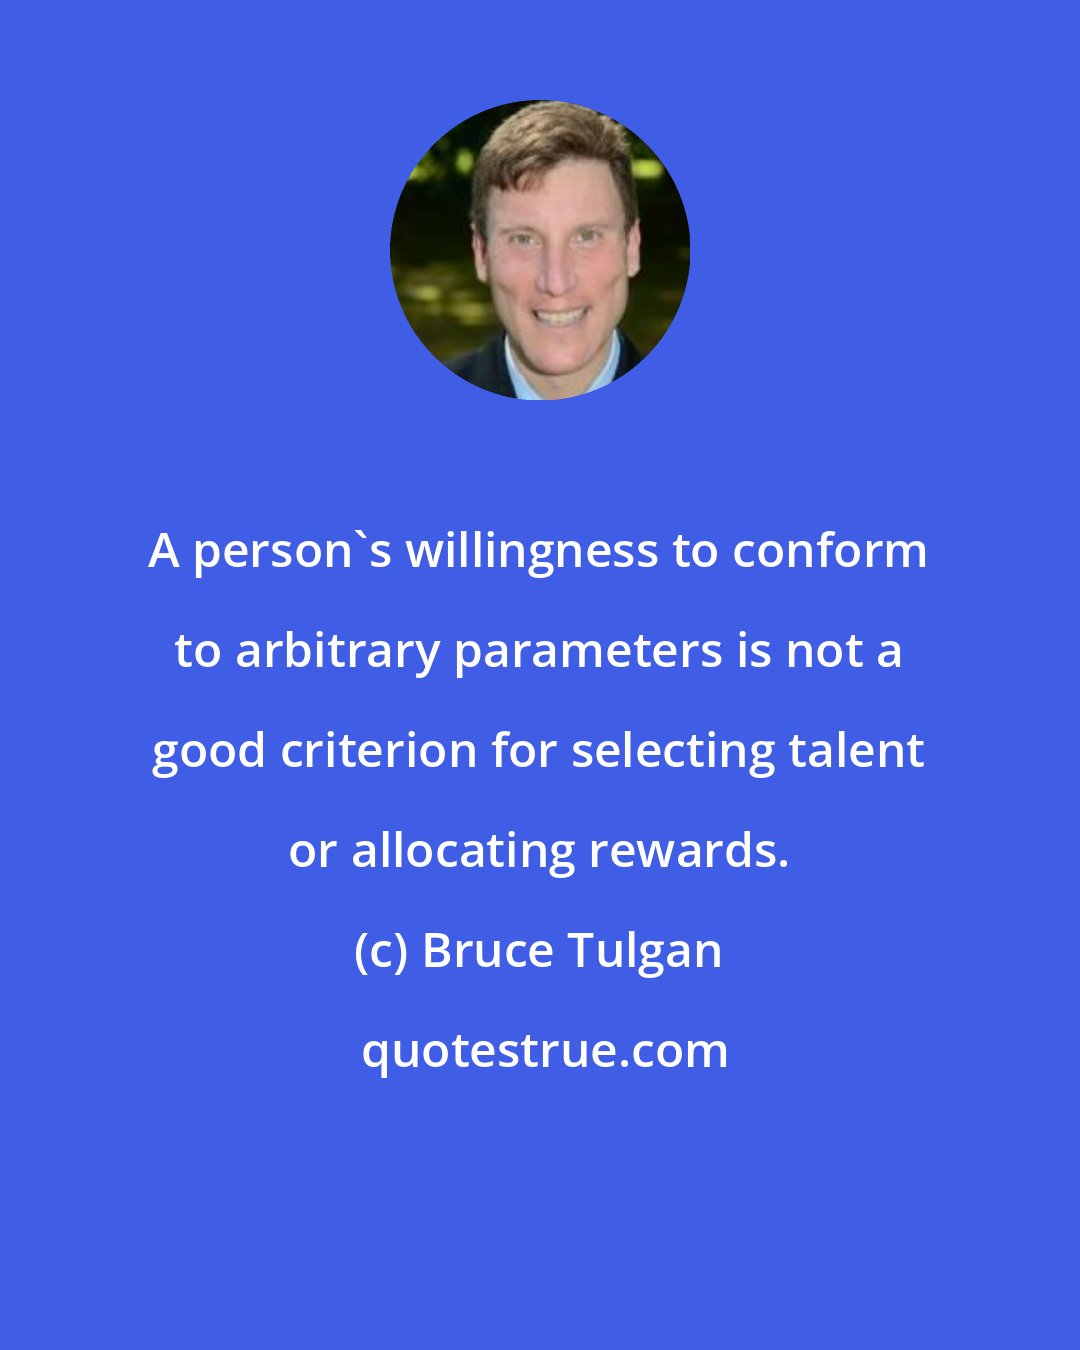 Bruce Tulgan: A person's willingness to conform to arbitrary parameters is not a good criterion for selecting talent or allocating rewards.